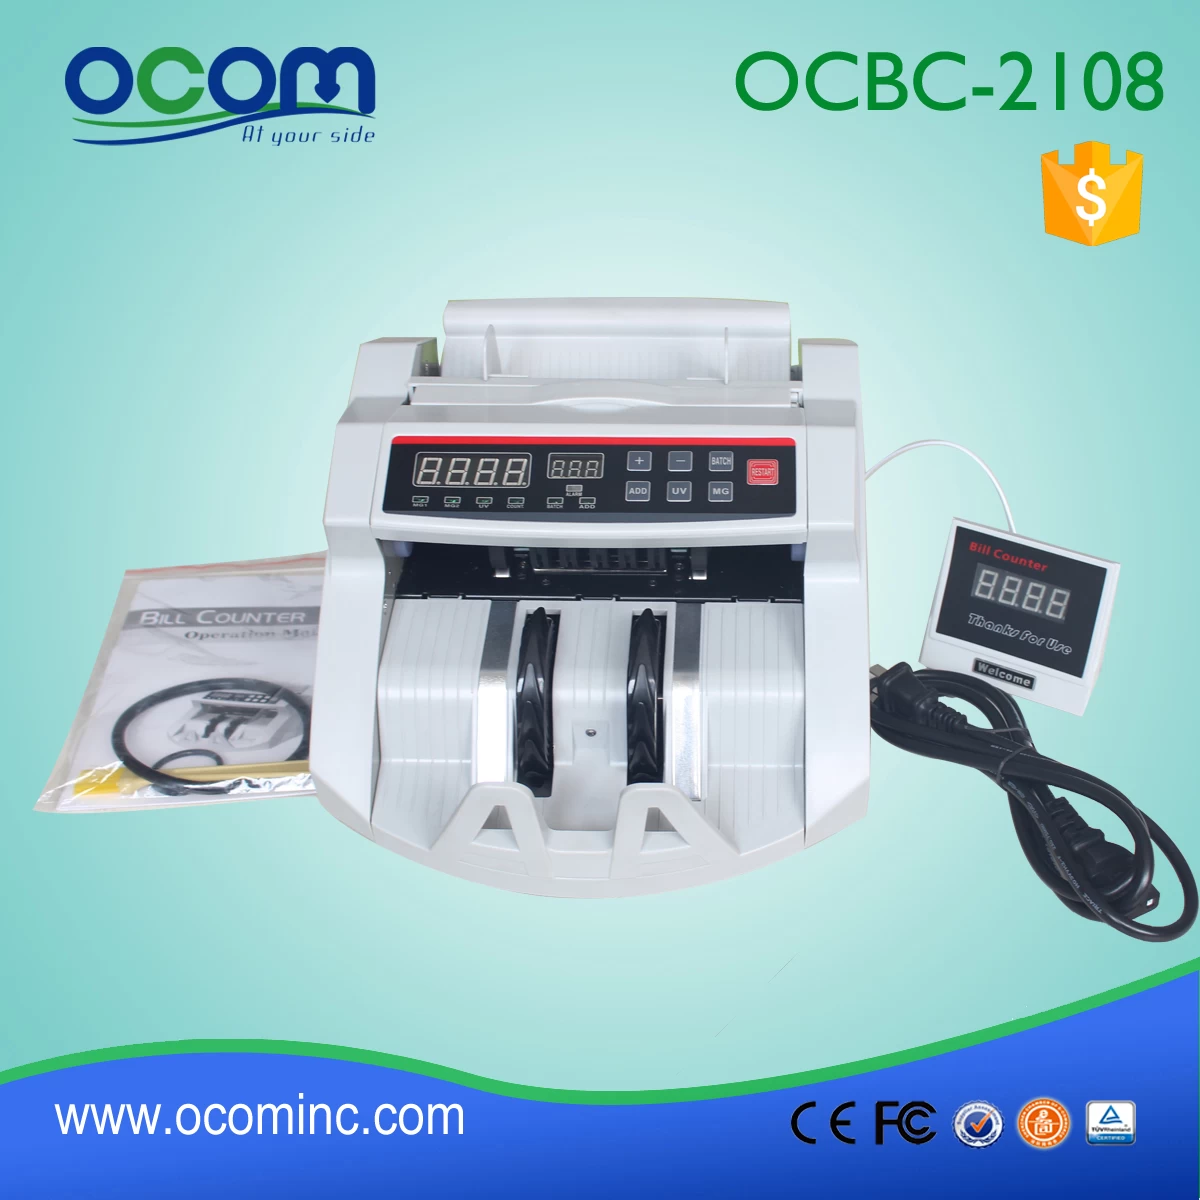 Bill money banknote counting machine with fake detector